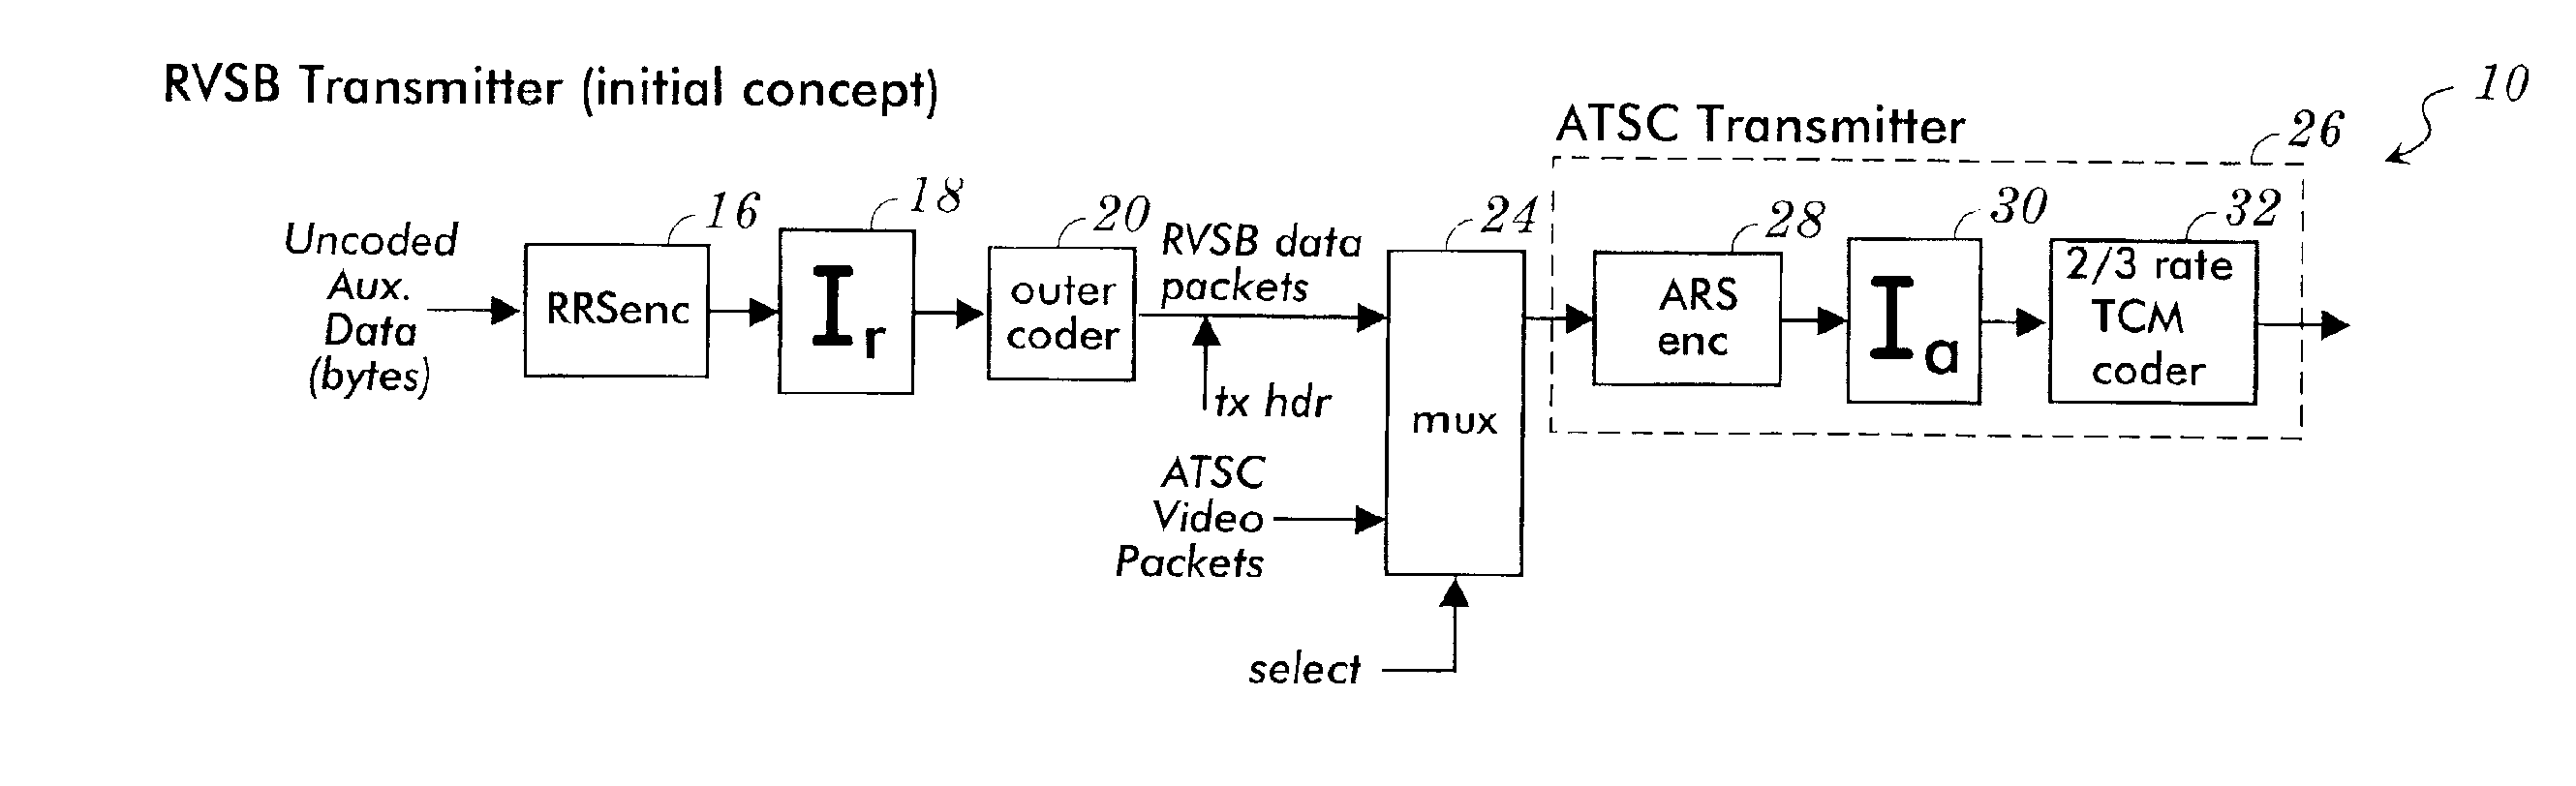 Digital communication system for transmitting and receiving robustly encoded data